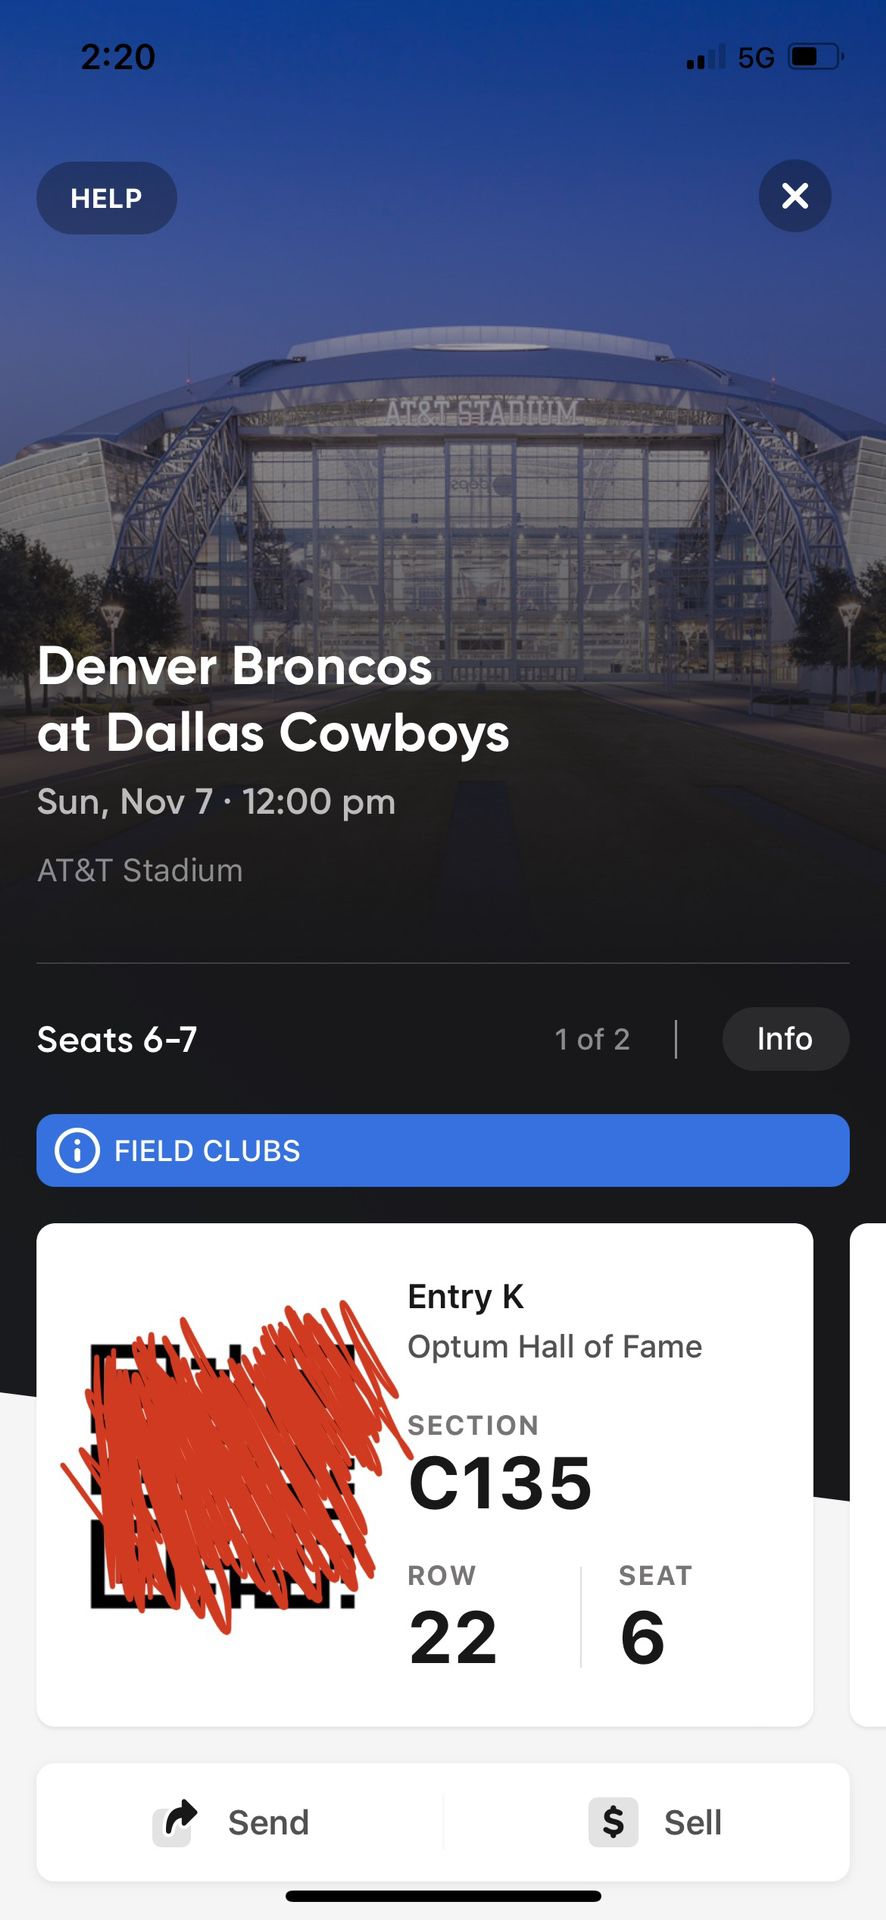 Dallas Cowboys vs. Denver Broncos, 2 Seats, Lower Level Section C135 (Hall of Fame Section), Sunday,  November 7th, 2021